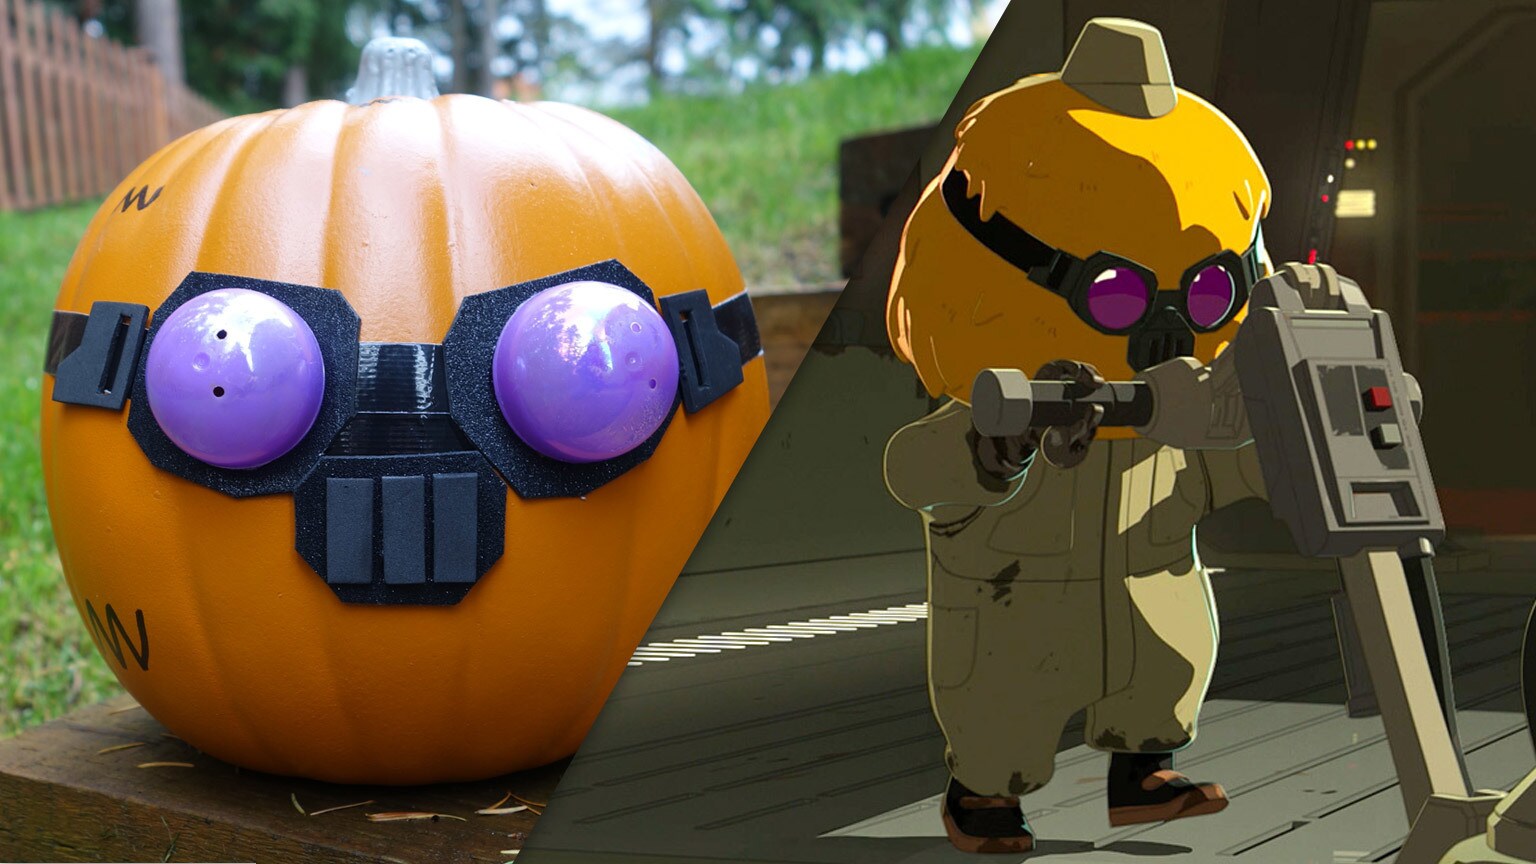 Keep It Clean This Halloween With This Star Wars Resistance Pumpkin